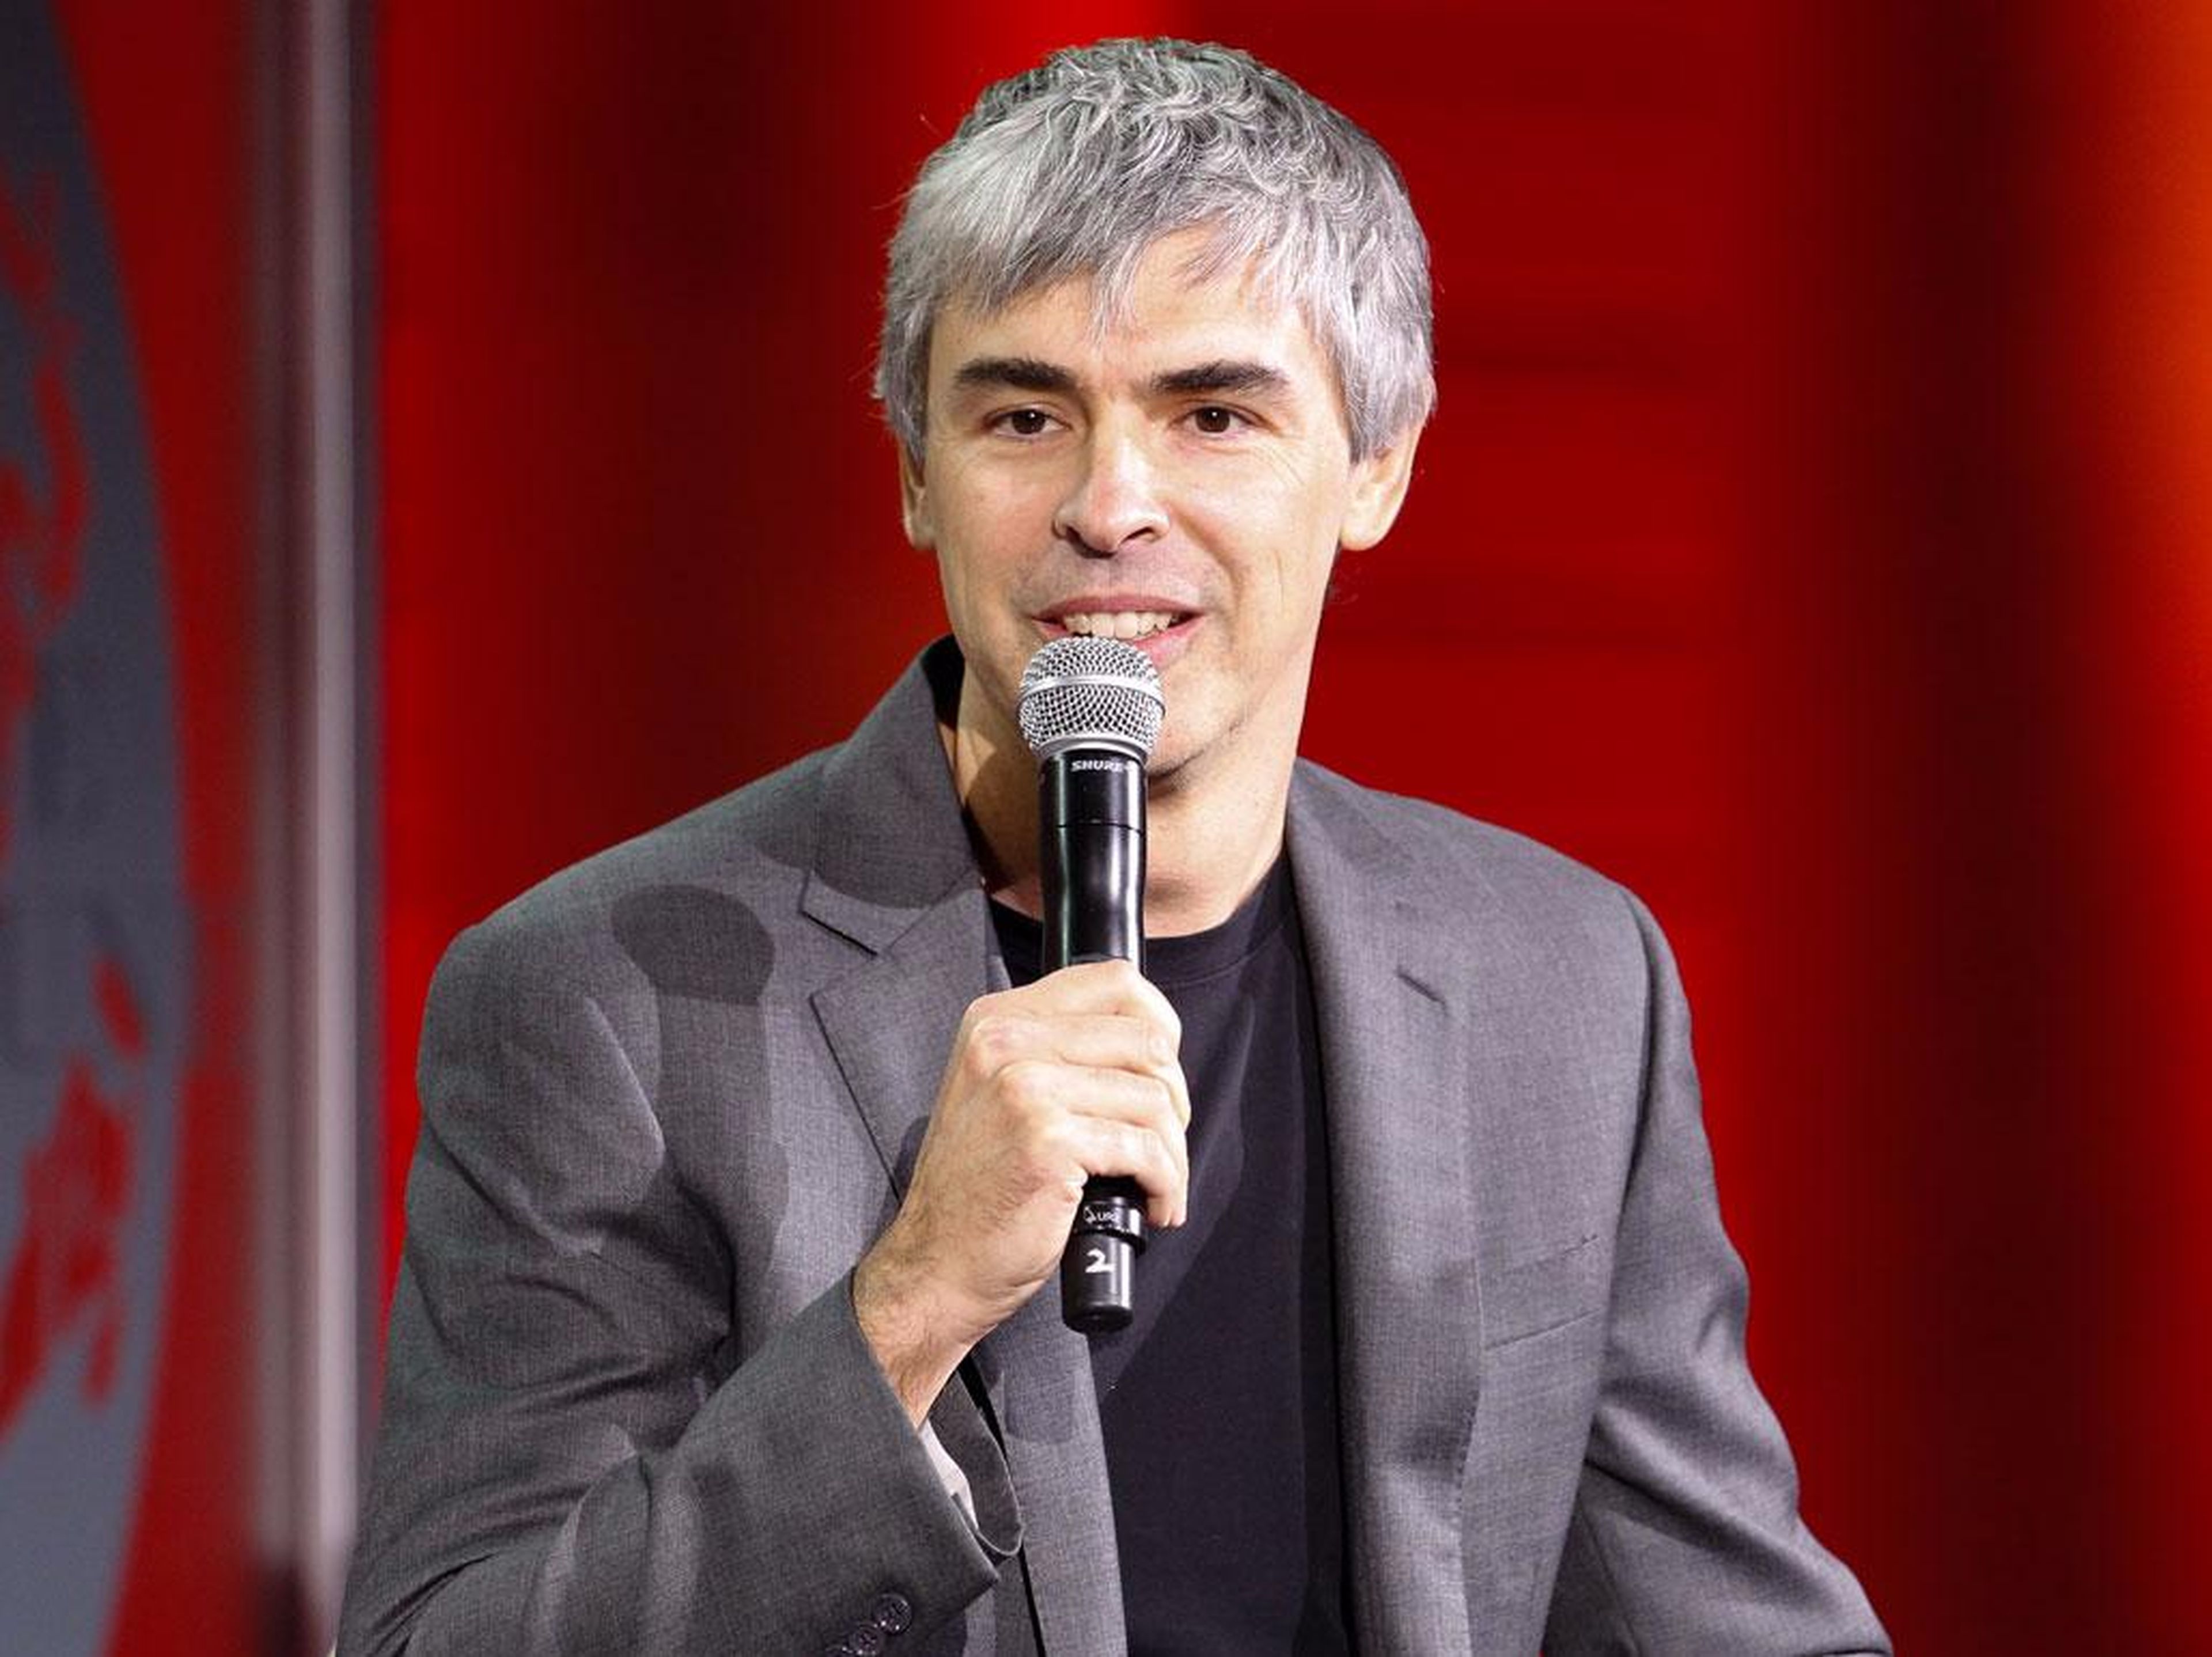 "If we were motivated by money, we would have sold the company a long time ago and ended up on a beach." — Larry Page, Google cofounder and CEO of Alphabet Inc.